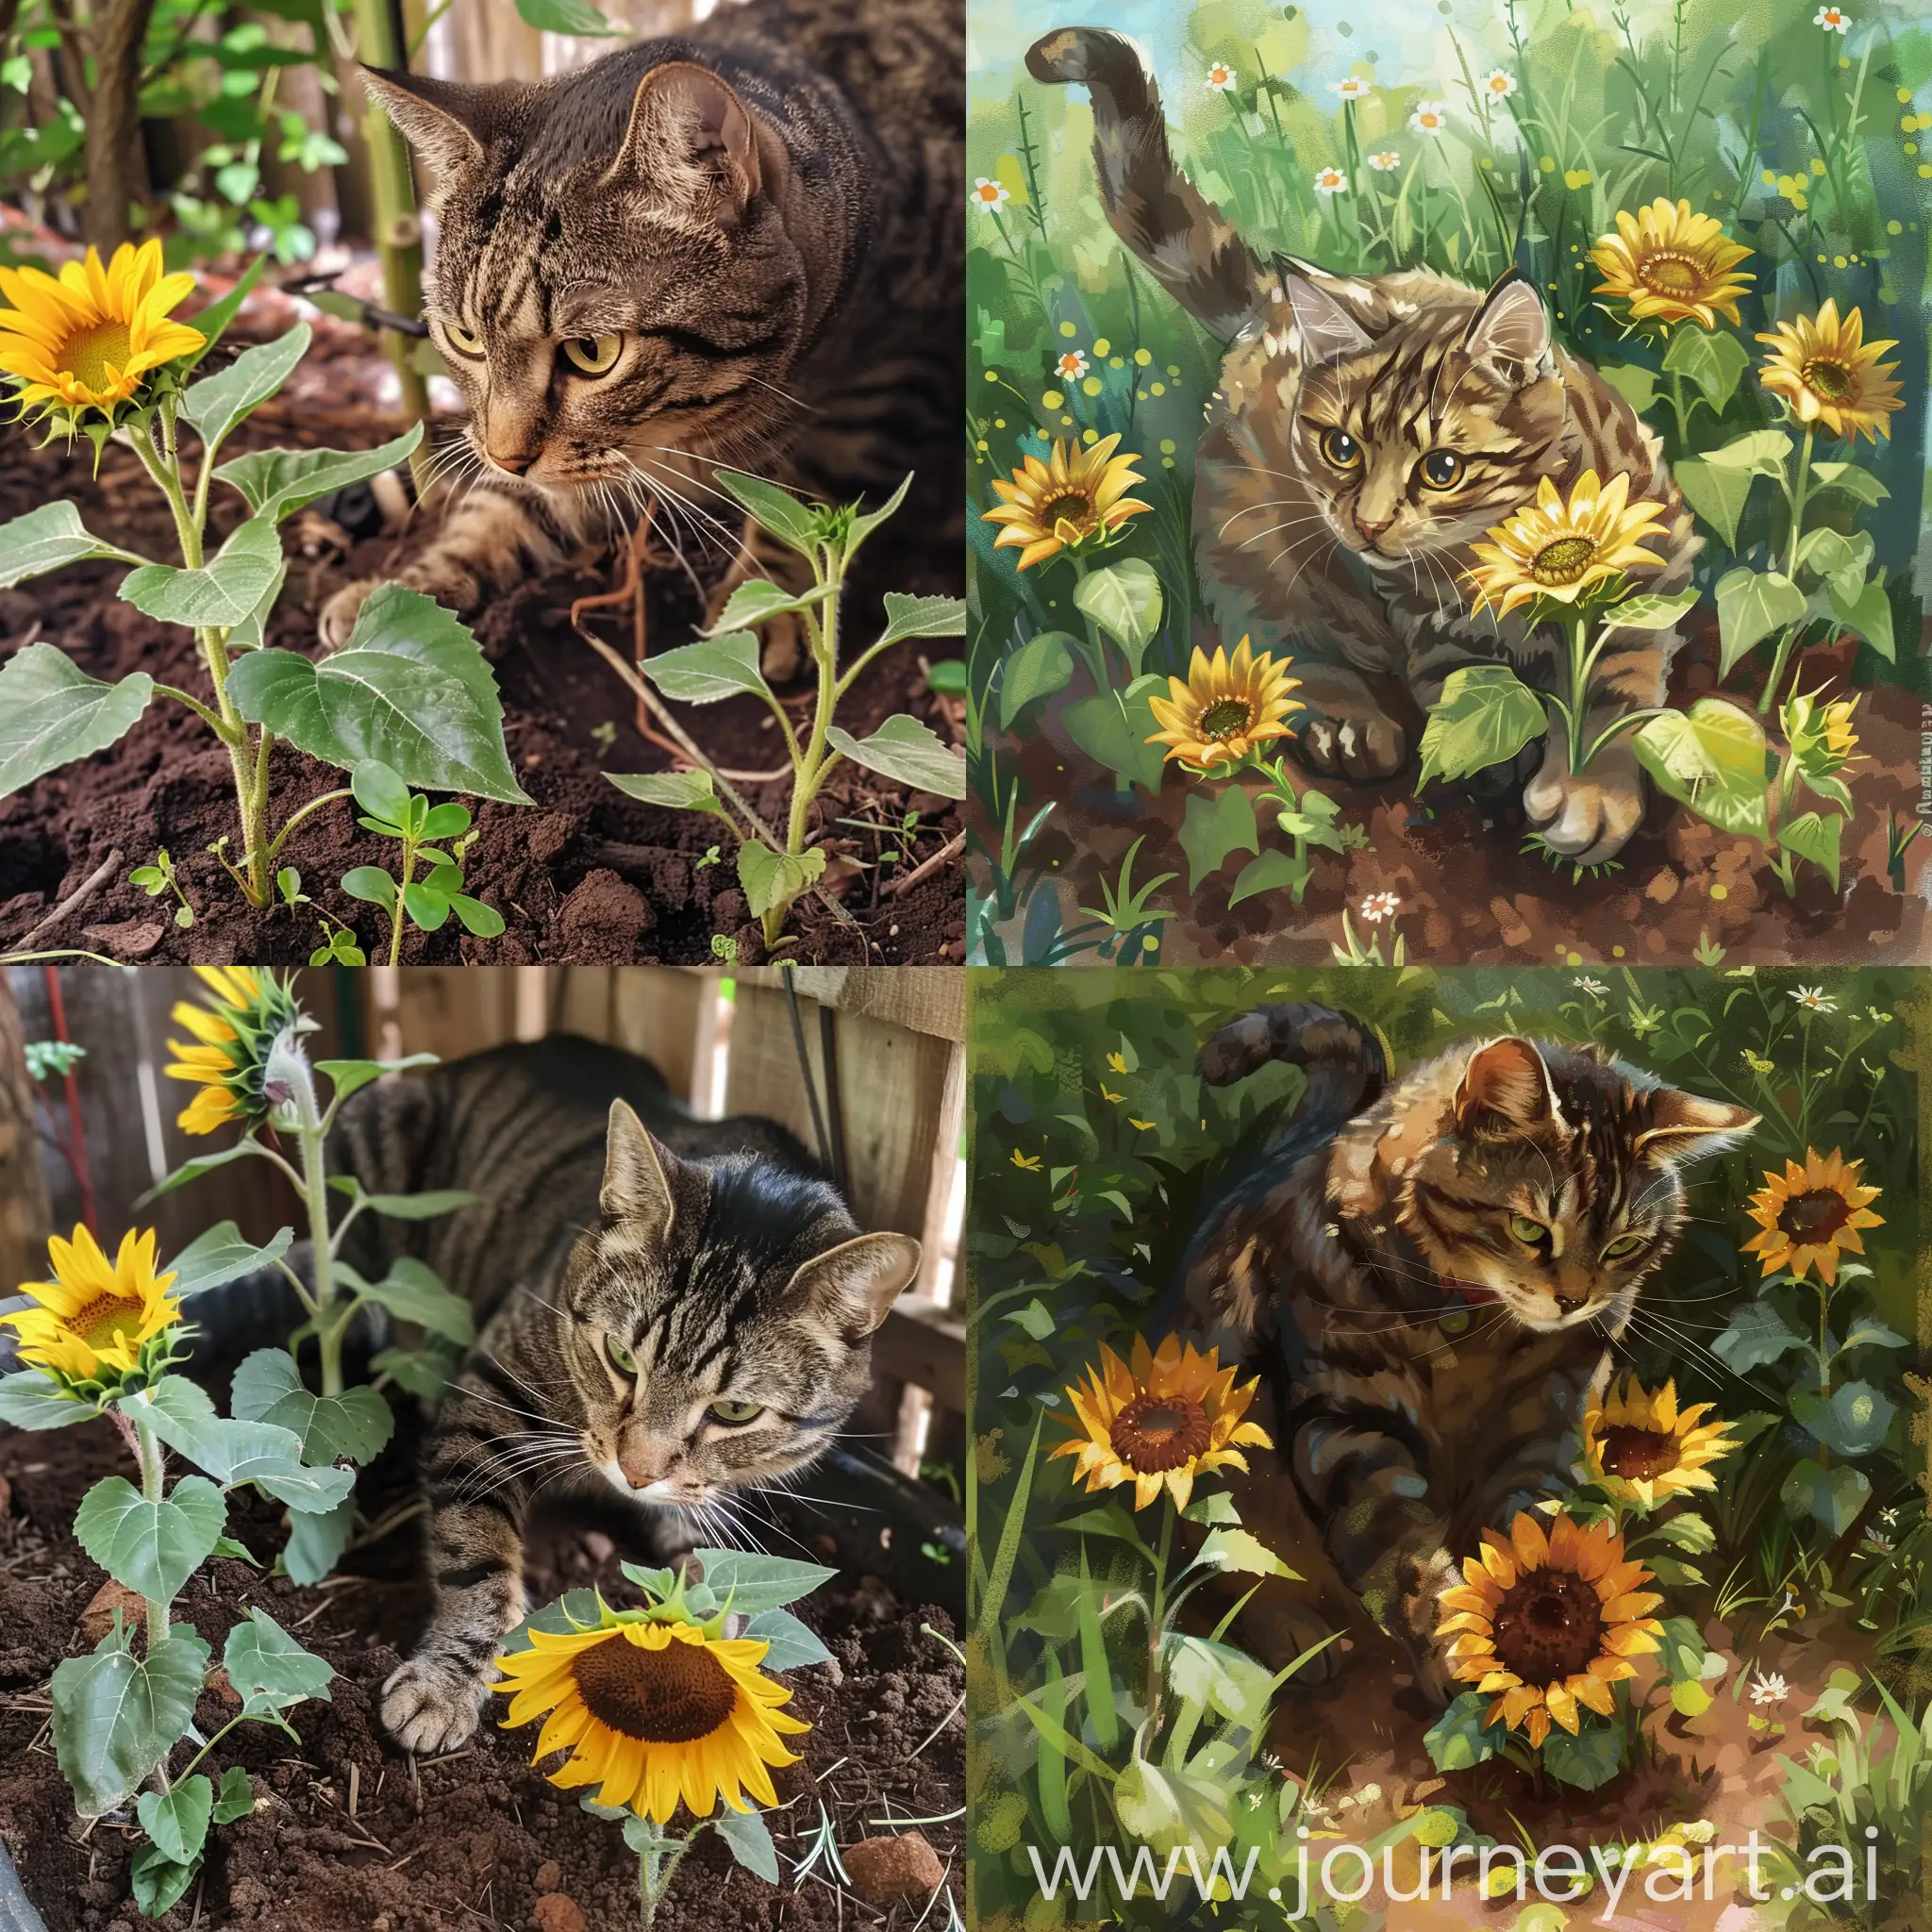 On an ordinary afternoon,a cat was planting its favorite sunflowers in its little garden.